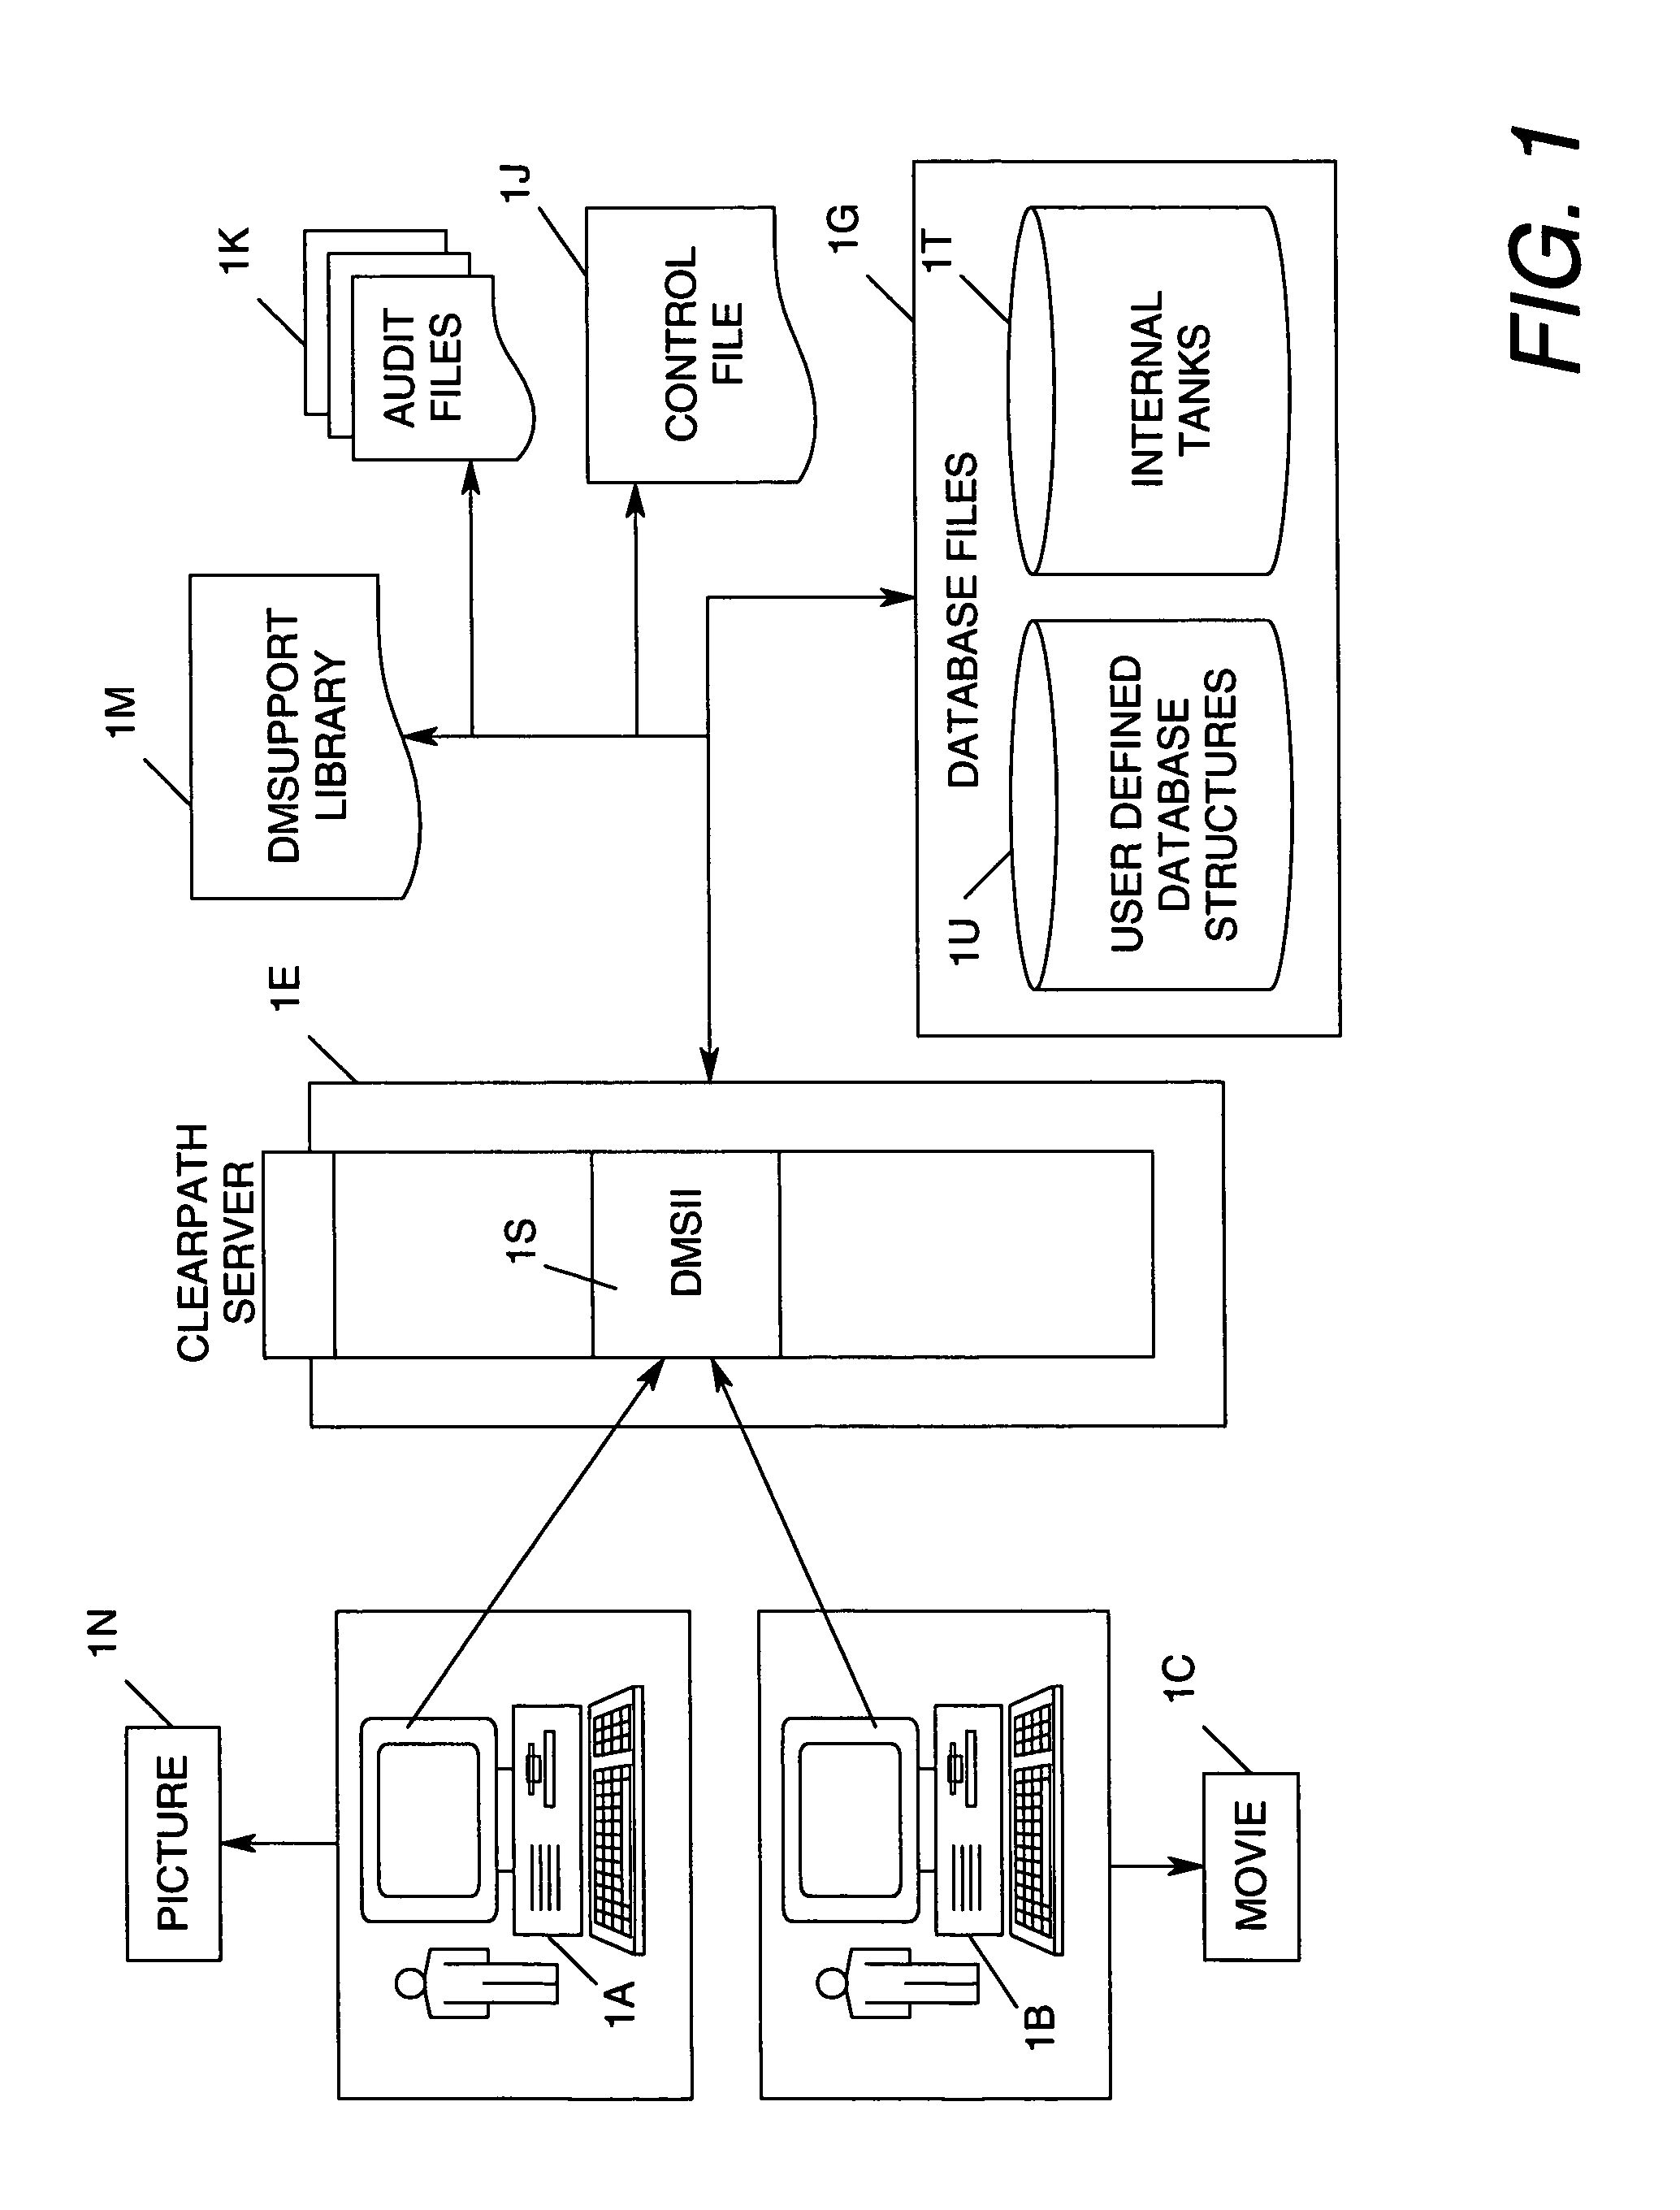 System and method to manipulate large objects on enterprise server data management system